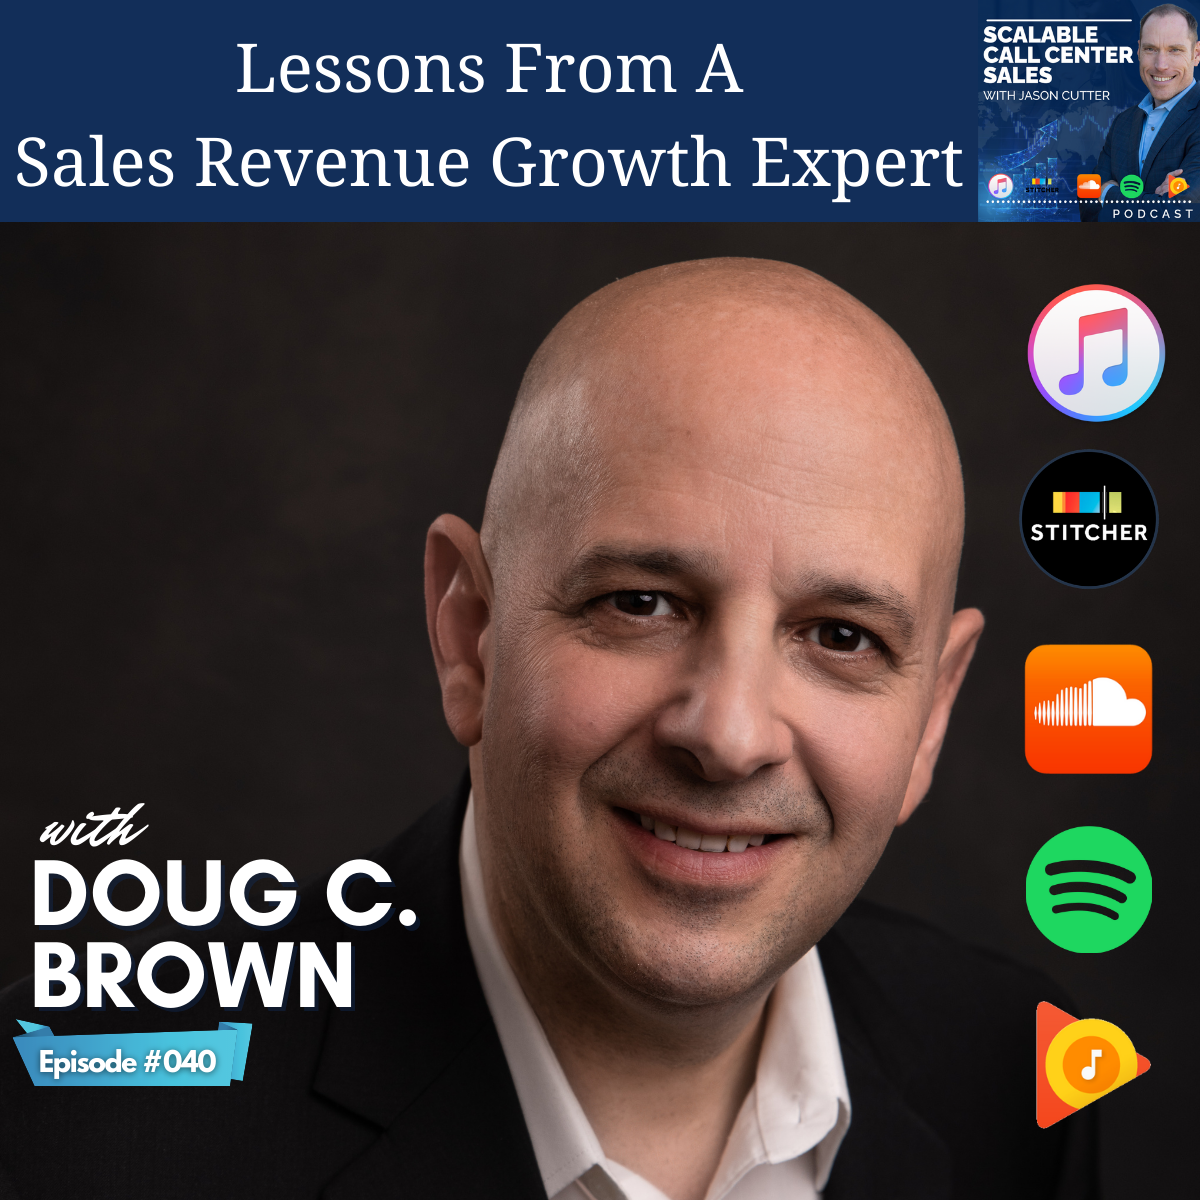 [040] Lessons From A Sales Revenue Growth Expert, with Doug C. Brown